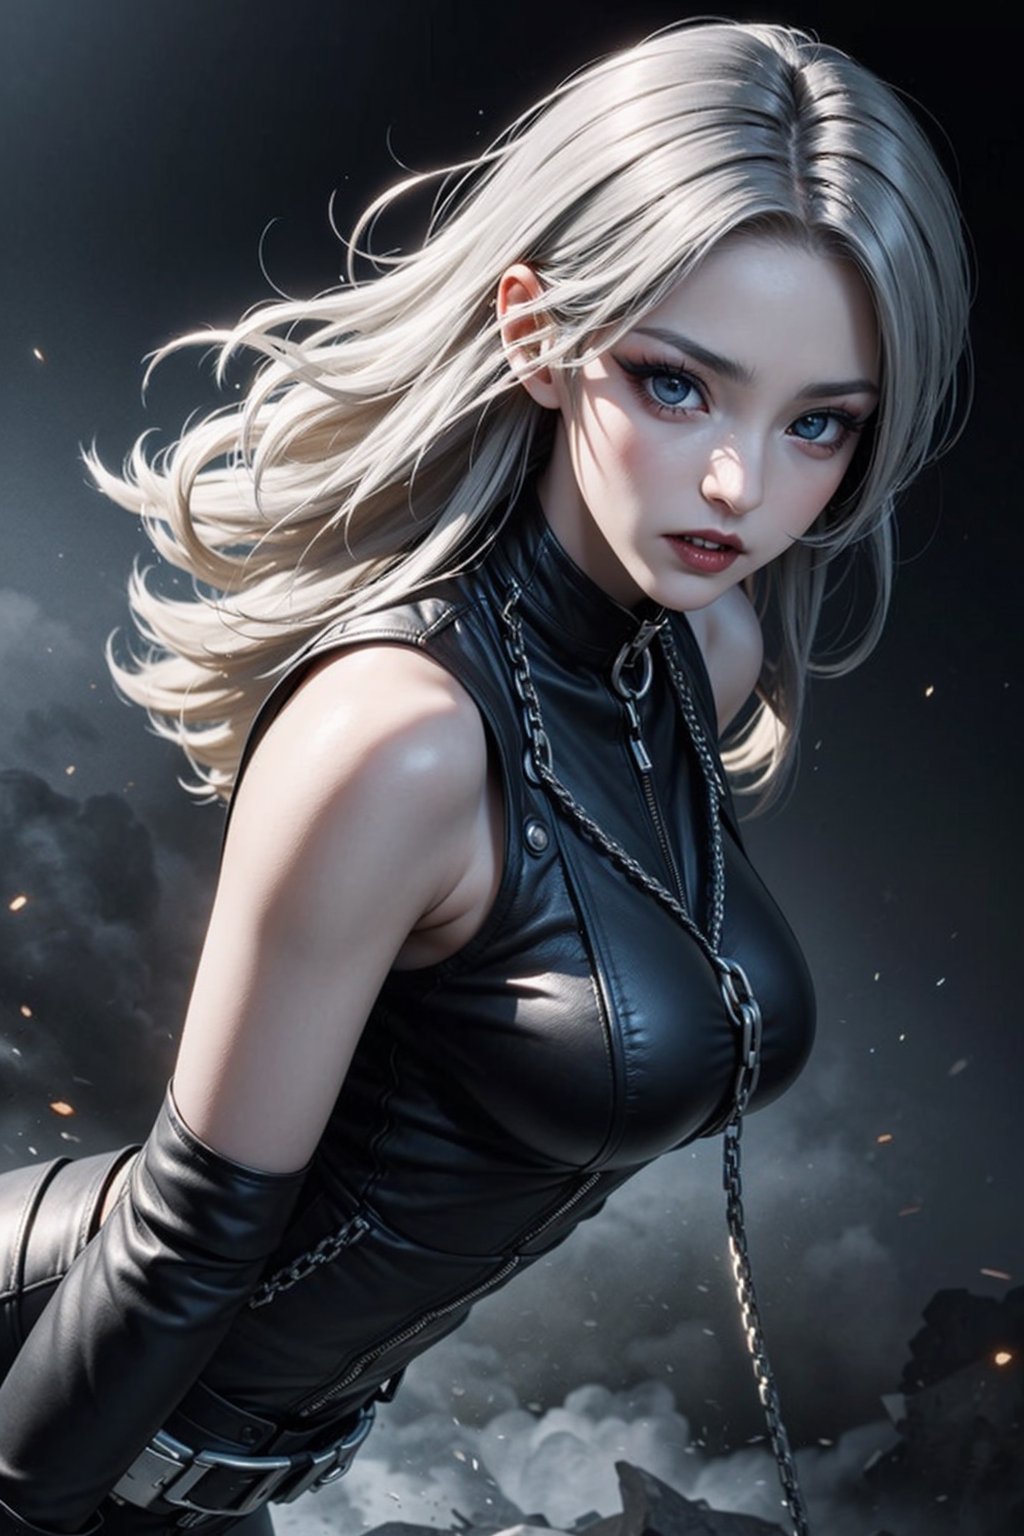 ultra realistic, super high resolutions, best quality, masterpiece, depth of field, realistic, photo-realistic, cinematic, young and beautiful female, 1female vampire, (ultra white skin), perfect face, smooth soft skin, buxom, fit, graceful, finely detailed beautiful face, finely detailed, beautiful heterochromia eyes, vibrant, kind, wise, (long silver hair:1.38), brilliant, artistic color palette, color grading, Extremely detailed, dynamic lighting, sharp, (wearing Leather Biker OTW Noos Jacket:1.34), (open chest with braless:1.38), (braless:1.38), (black leather pants with iron chain:1.36), (long legs:1.34),  (biker boots:1.34), seductive smile, (135mm lens shots:1.36), (close up shots:1.32), (low angle shots:1.38), medium breast, (natural breast:1.36), (saggy breast:1.36),  walking at cemetery, perfect body figure, big blue light eyes, (heavy fog environment:1.36), (A pair of large wolf eyes looking at her:1.36),  walking, (vampire makeup:1.4), seductive look, hourglass body shape, iron chain on neck, iron chain on arms and legs, 